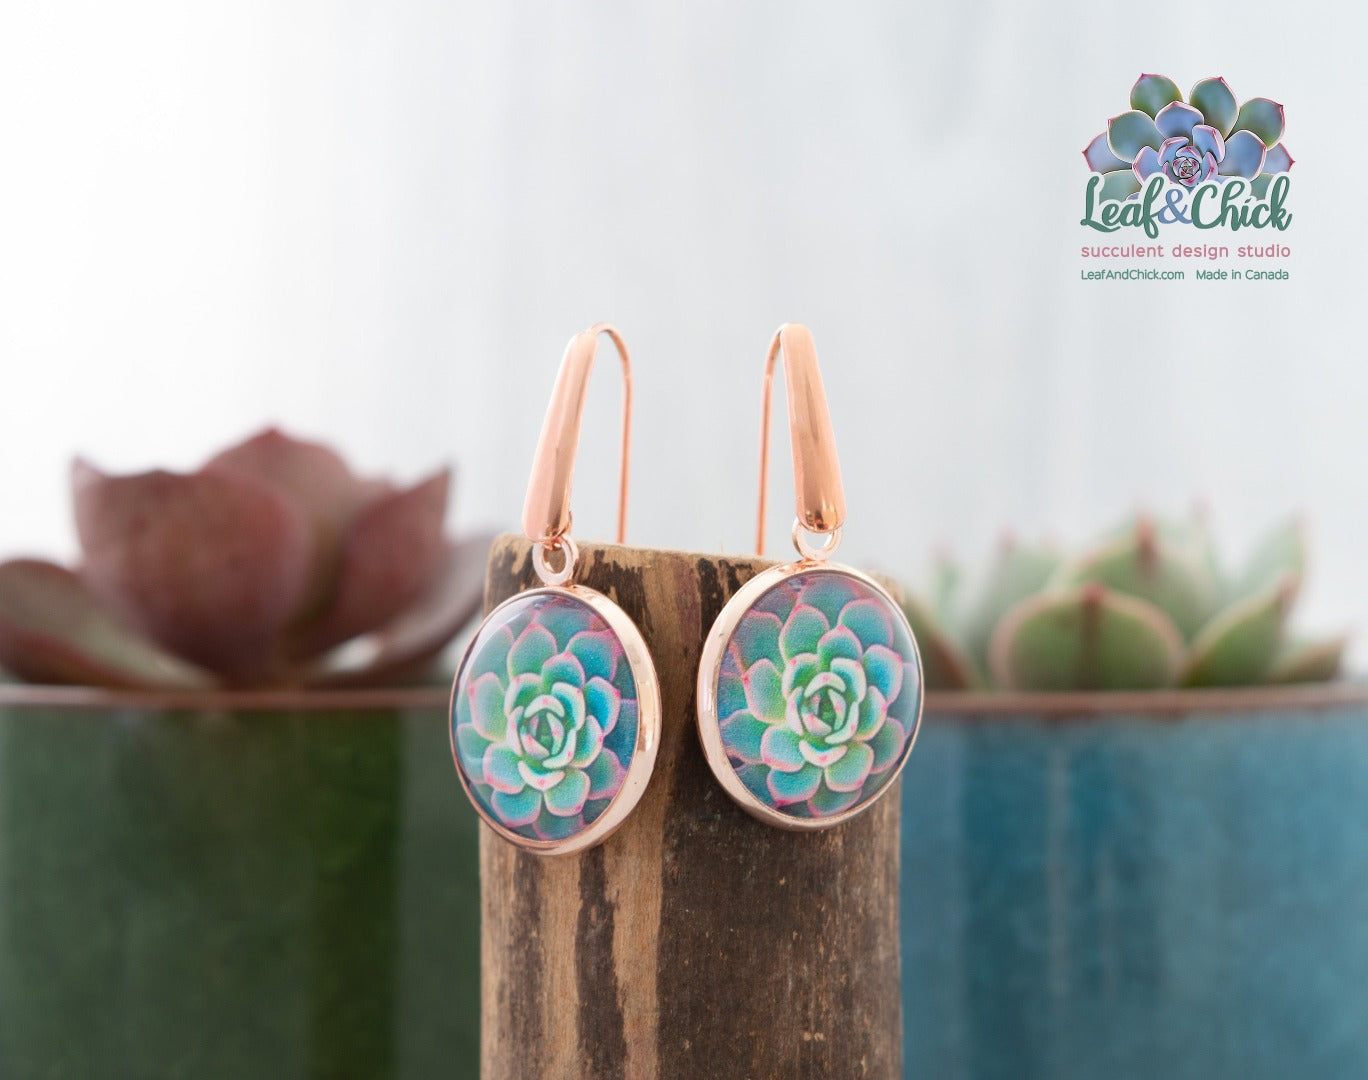 rose gold succulent earrings with stylized green/ blue echeveria art